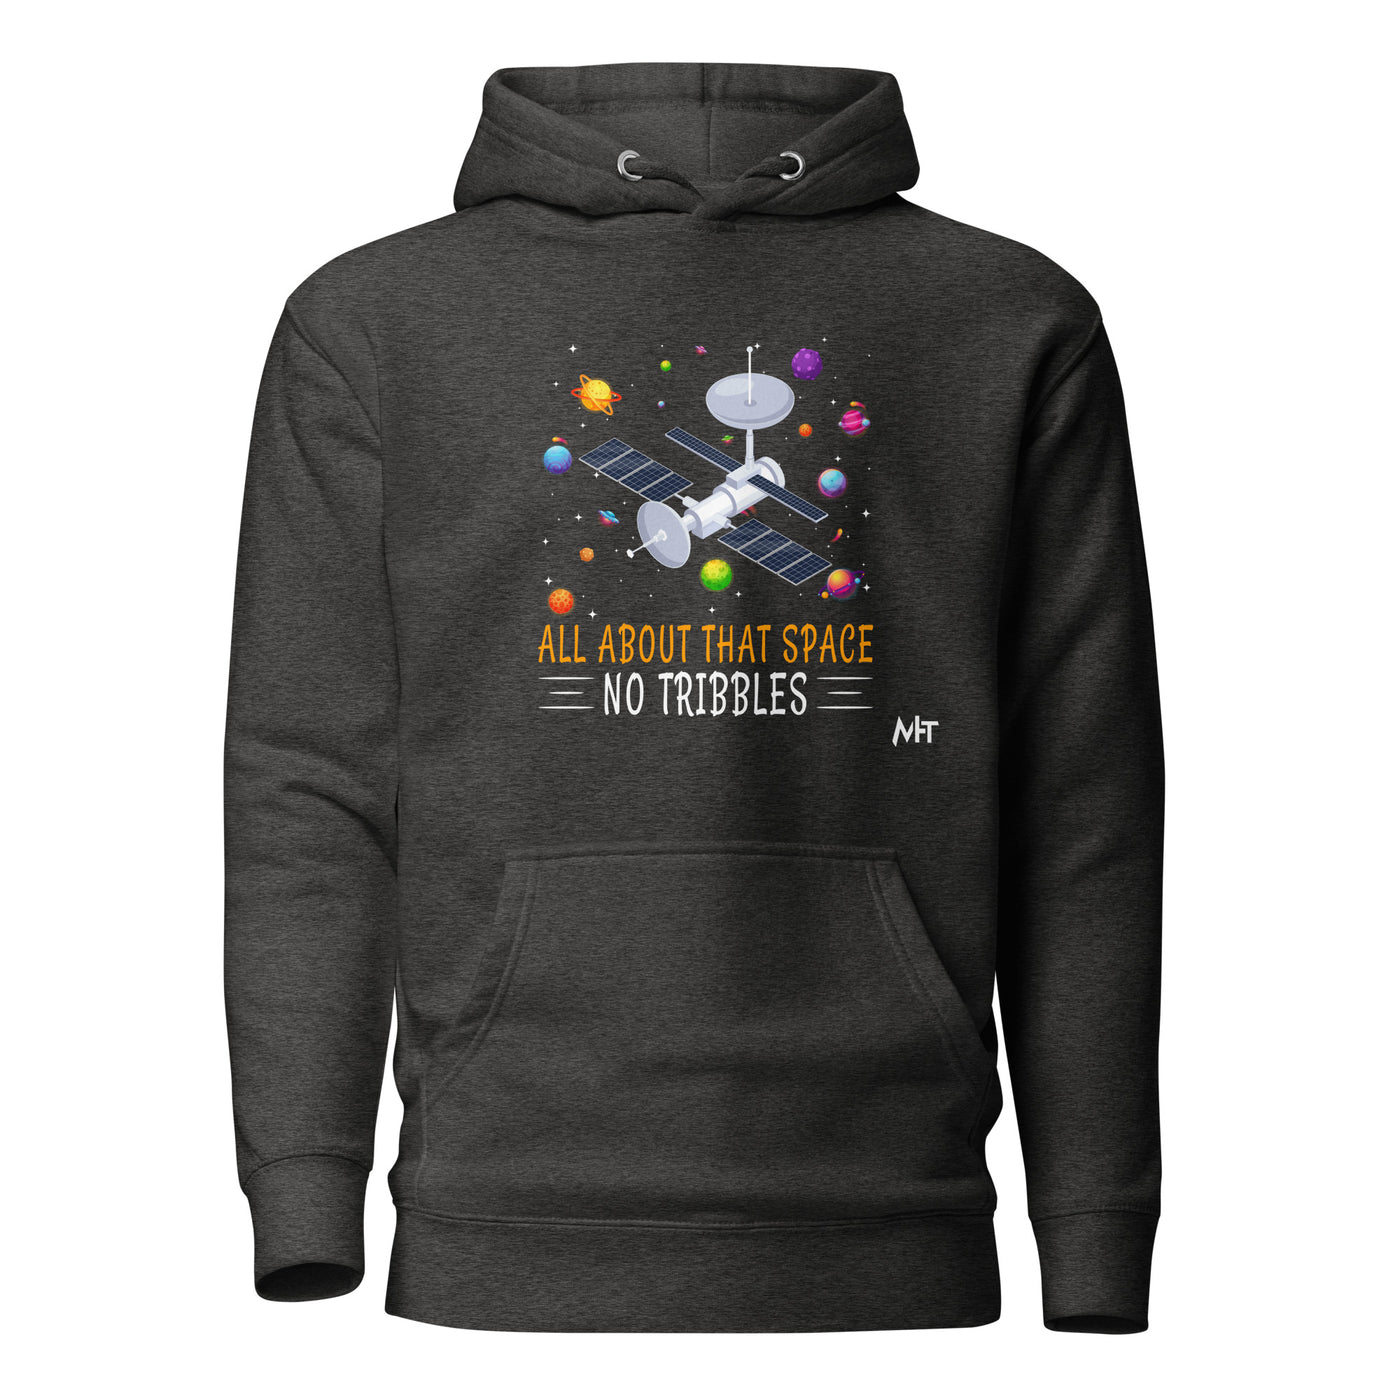 All about that Space - Unisex Hoodie